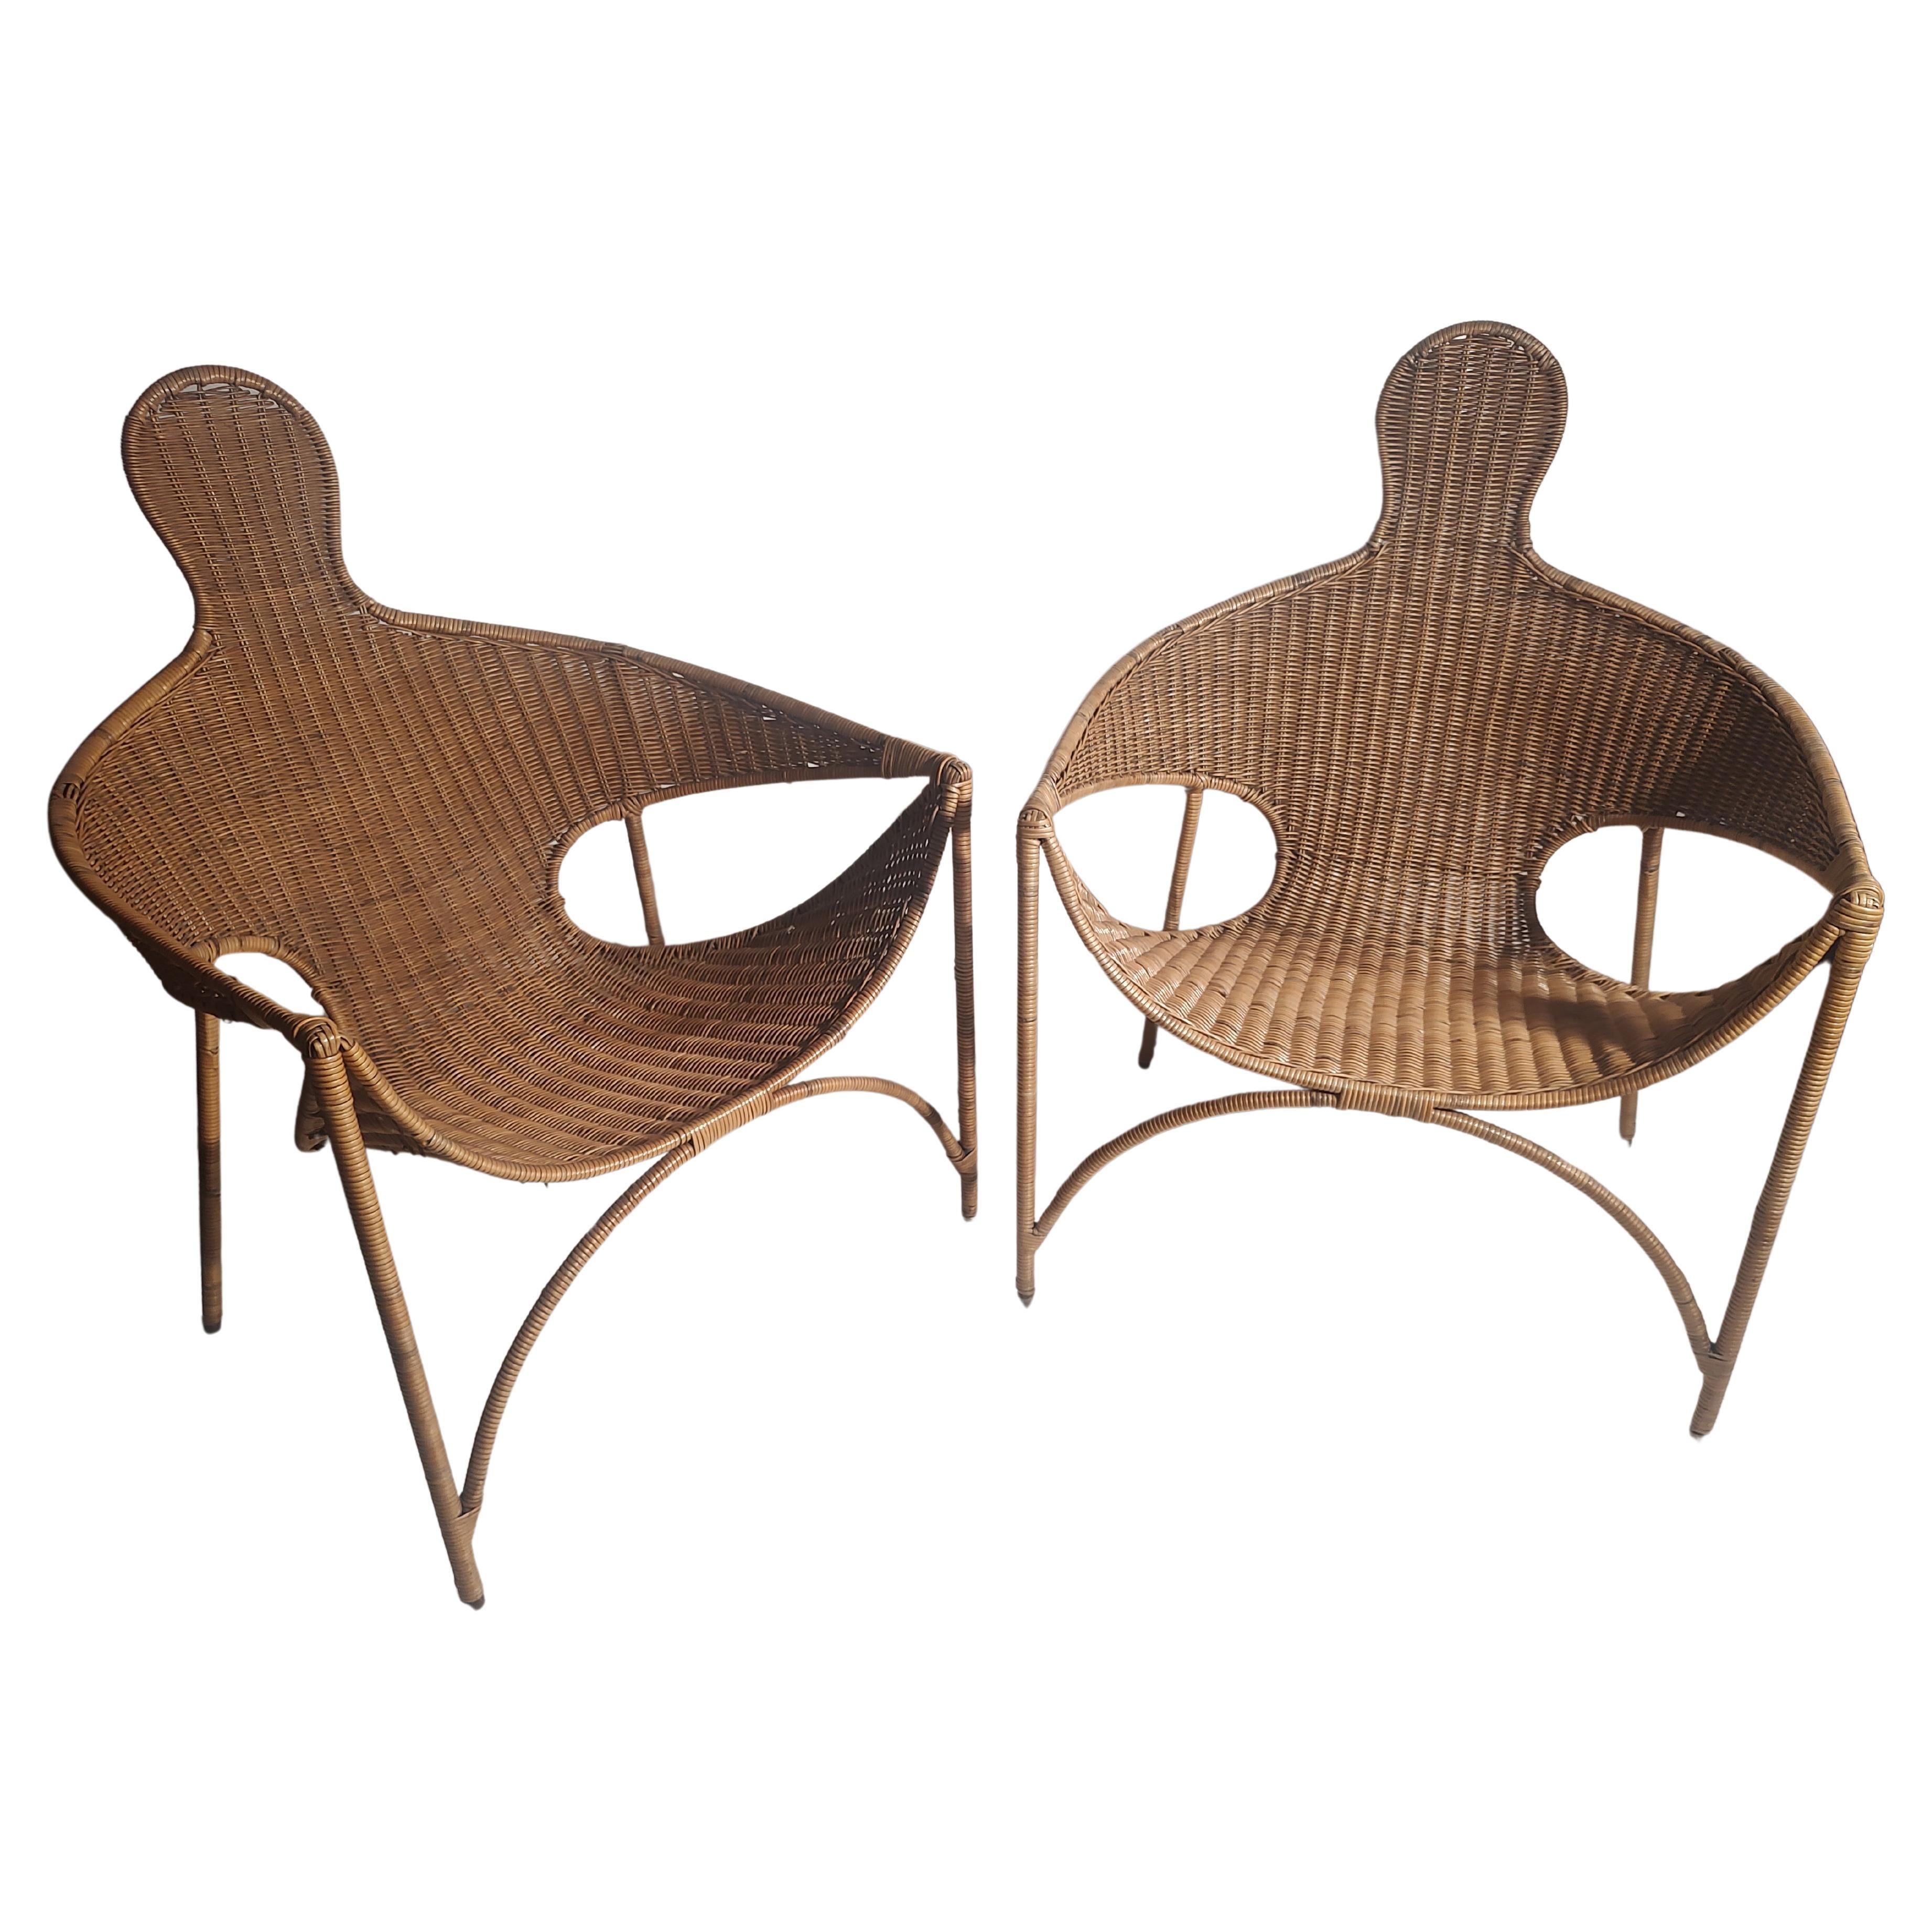 American Pair of Mid Century Modern Sculptural Wicker & Iron Lounge Chairs Francis Mair  For Sale